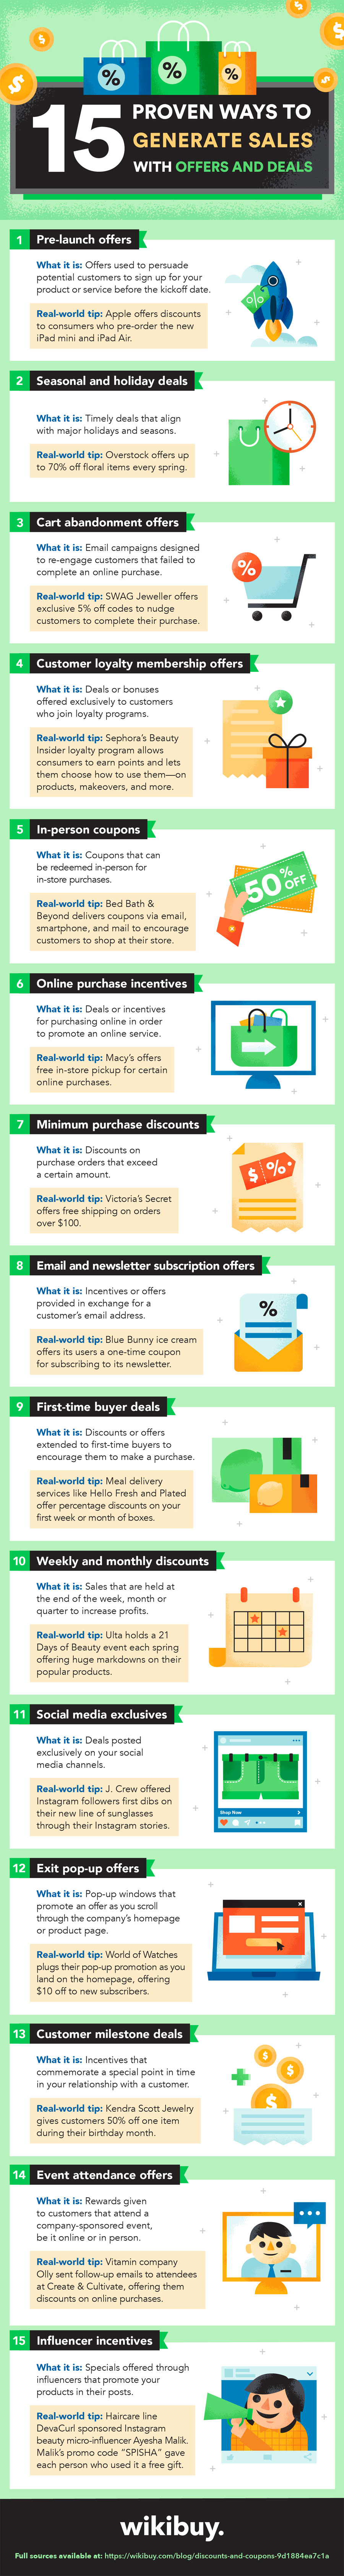 15 Ideas to Increase Sales with Offers & Deals